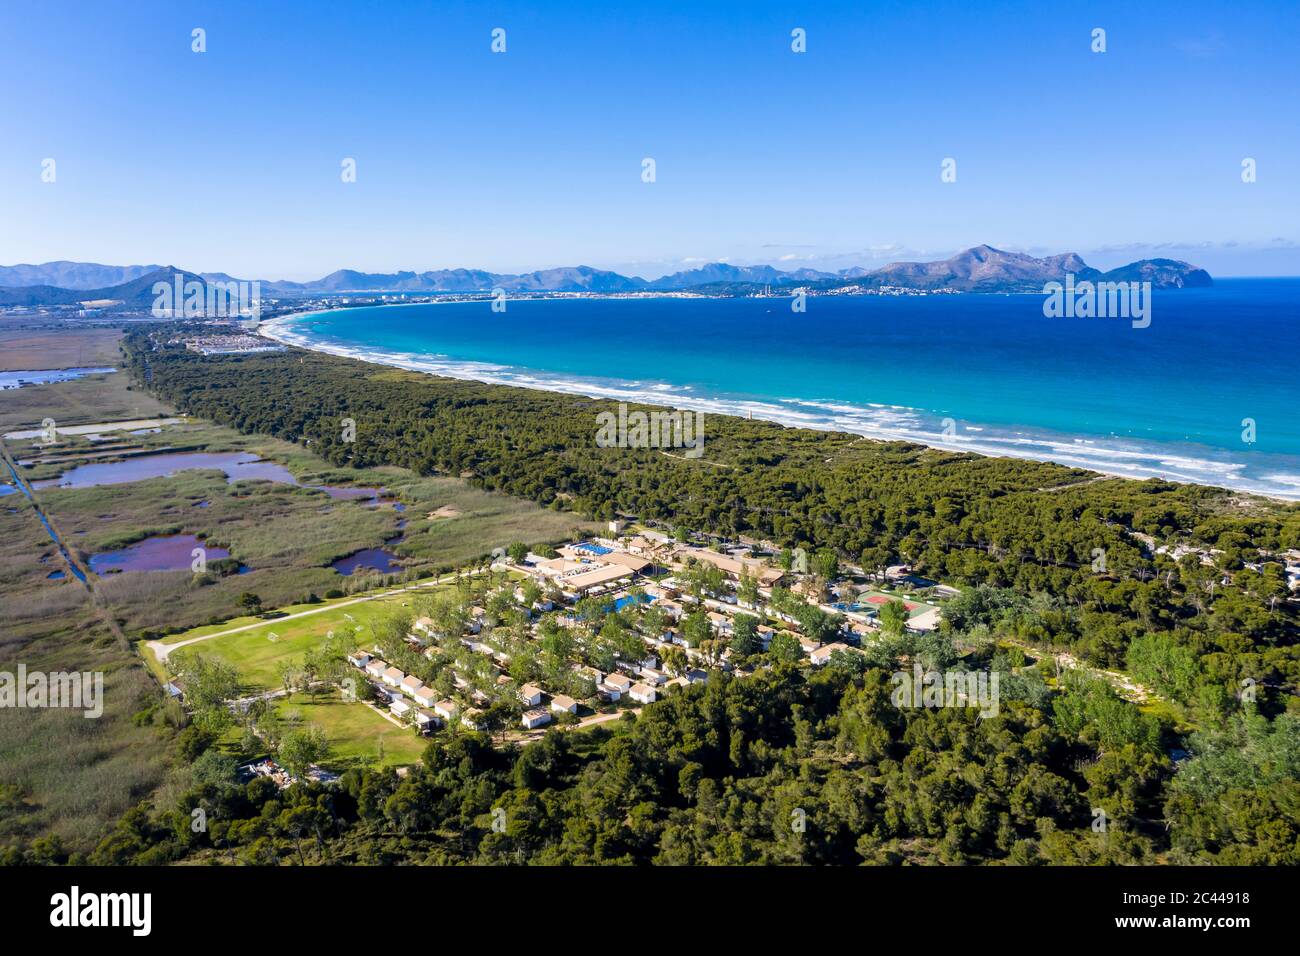 Spain, Balearic Islands, Mallorca, Can Picafort, Helicopter view of tourist resort and forested coastline in summer Stock Photo